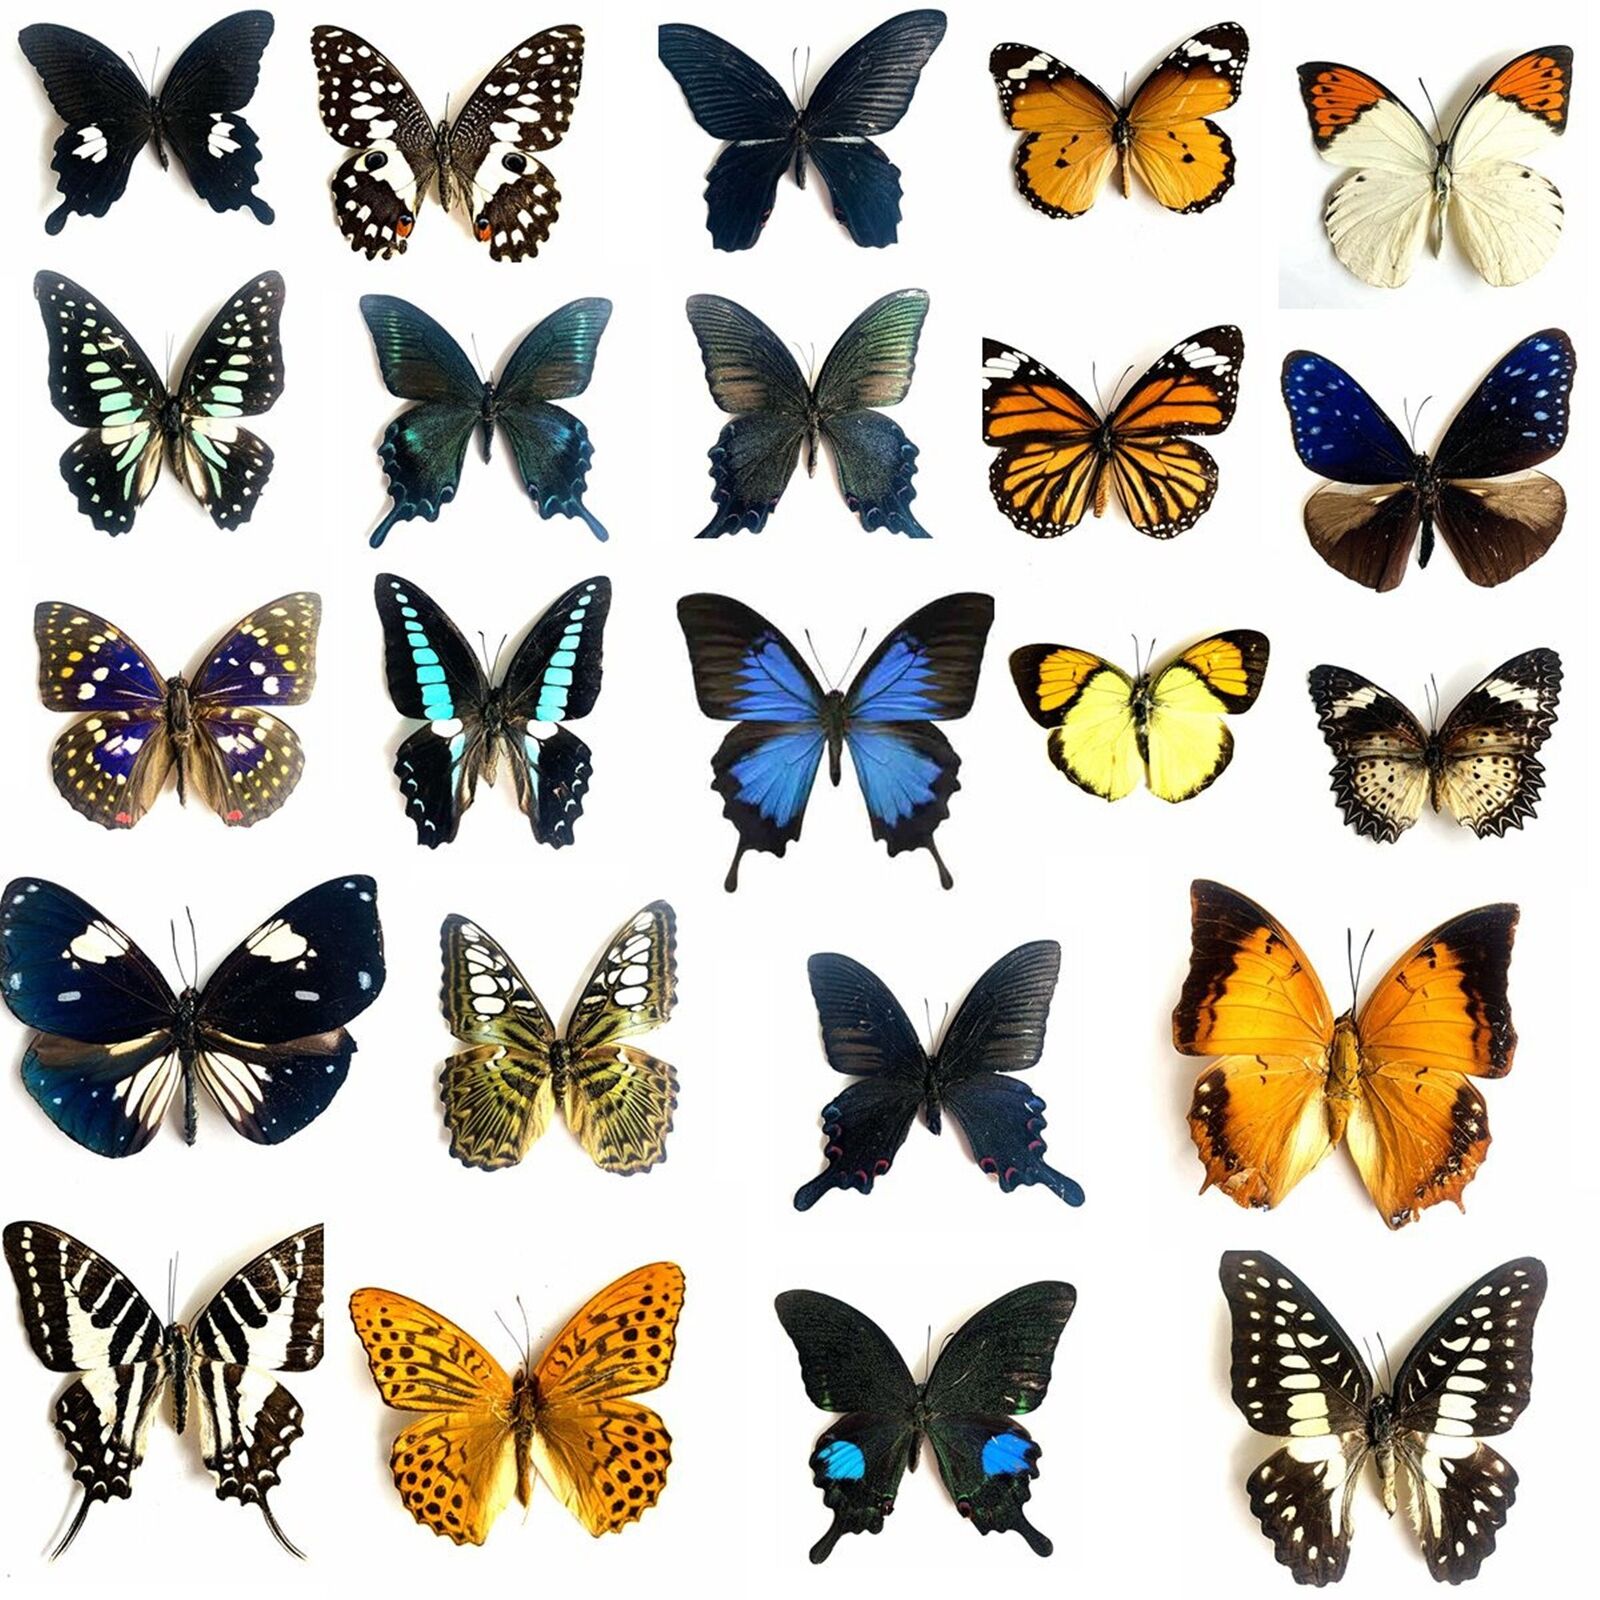 10pcs（Butterfly species with no duplicates）​natural Real Butterflies Specimen